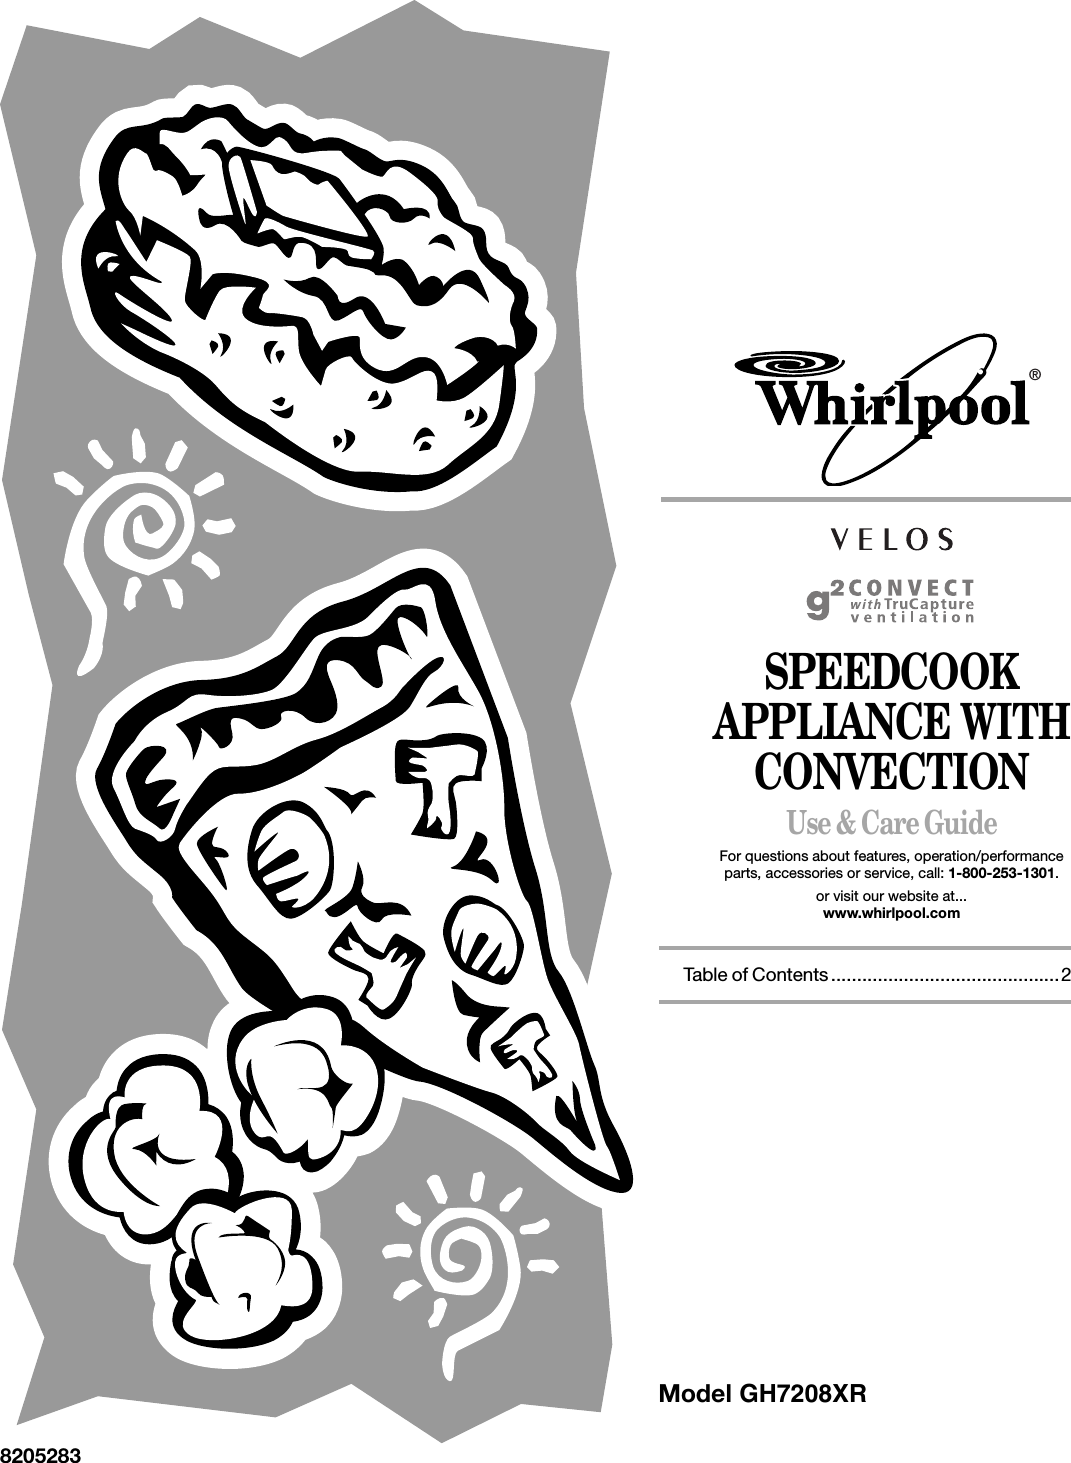 SPEEDCOOK APPLIANCE WITH CONVECTION Use &amp; Care GuideFor questions about features, operation/performanceparts, accessories or service, call: 1-800-253-1301.or visit our website at...www.whirlpool.comTable of Contents............................................28205283®Model GH7208XR